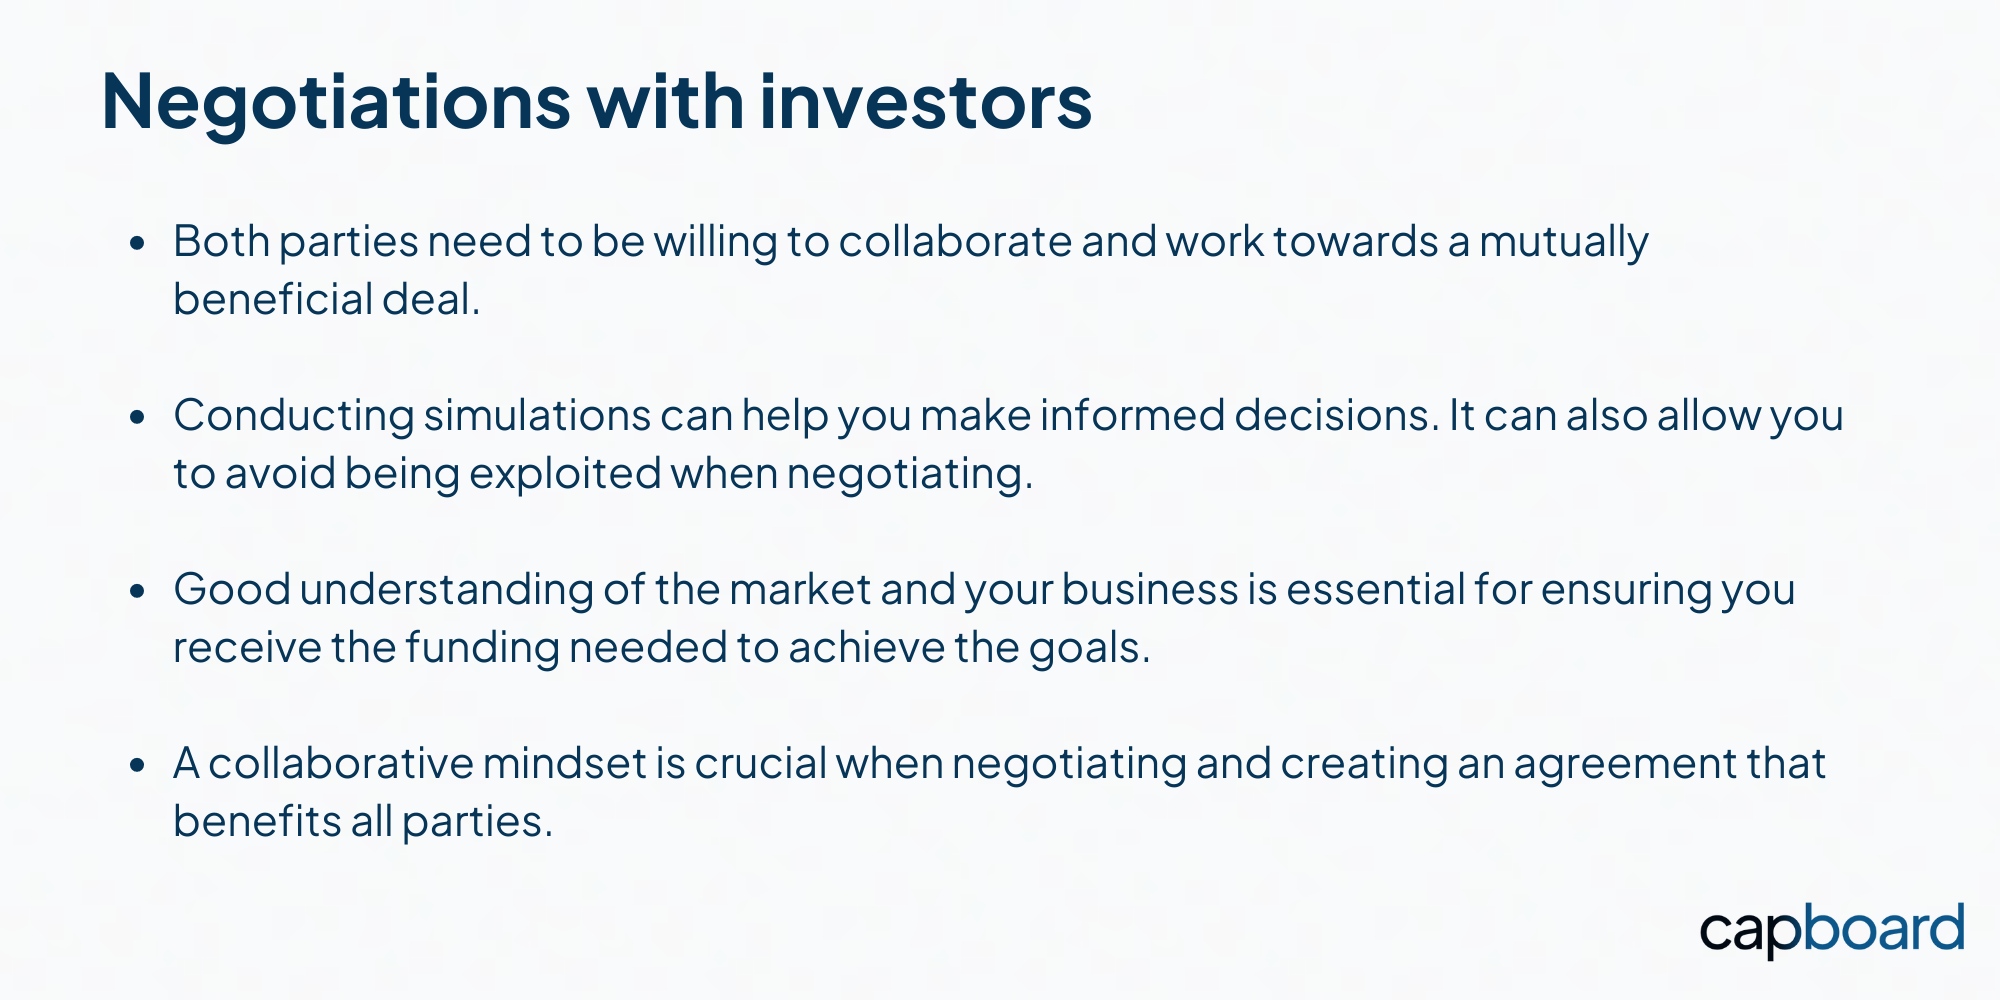 4 tips when negotiating with investors